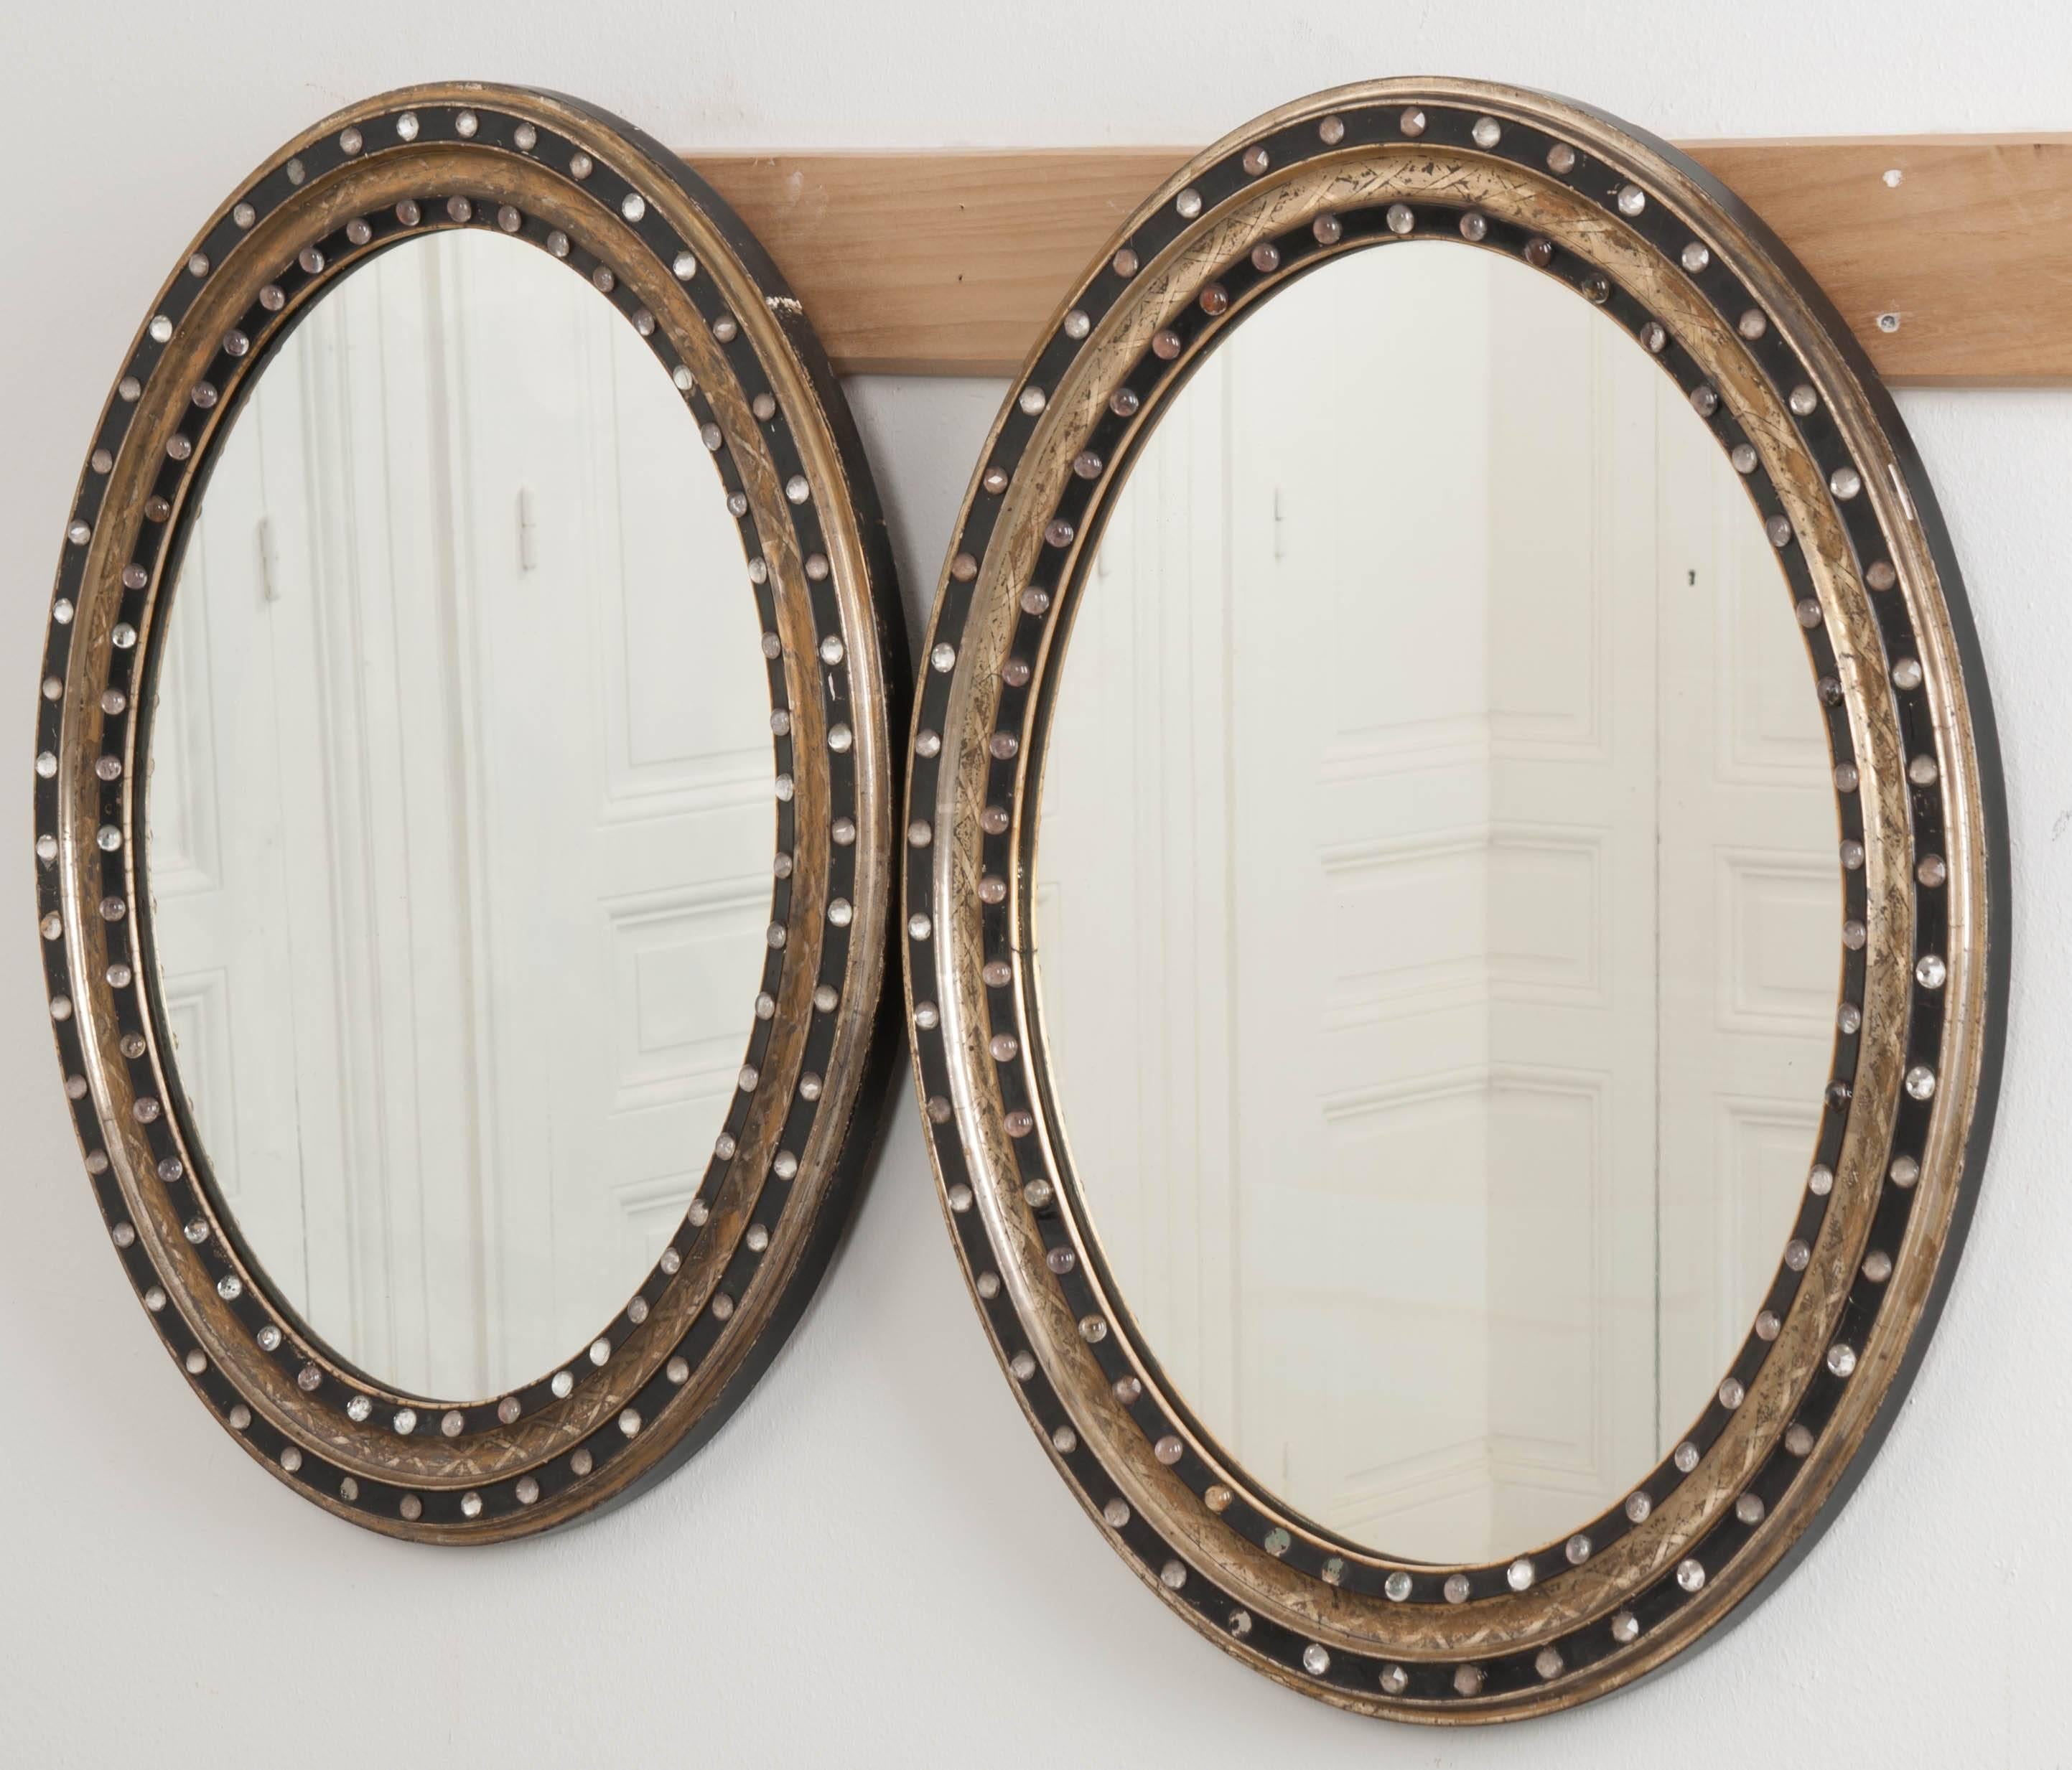 A wonderfully sized French oval mirror that is uniquely styled. Combinations of silver and gold metallic gilt sharply contrast the ebonized frame which has been decorated with round and faceted crystals. Crosshatched etching, along with the inlaid